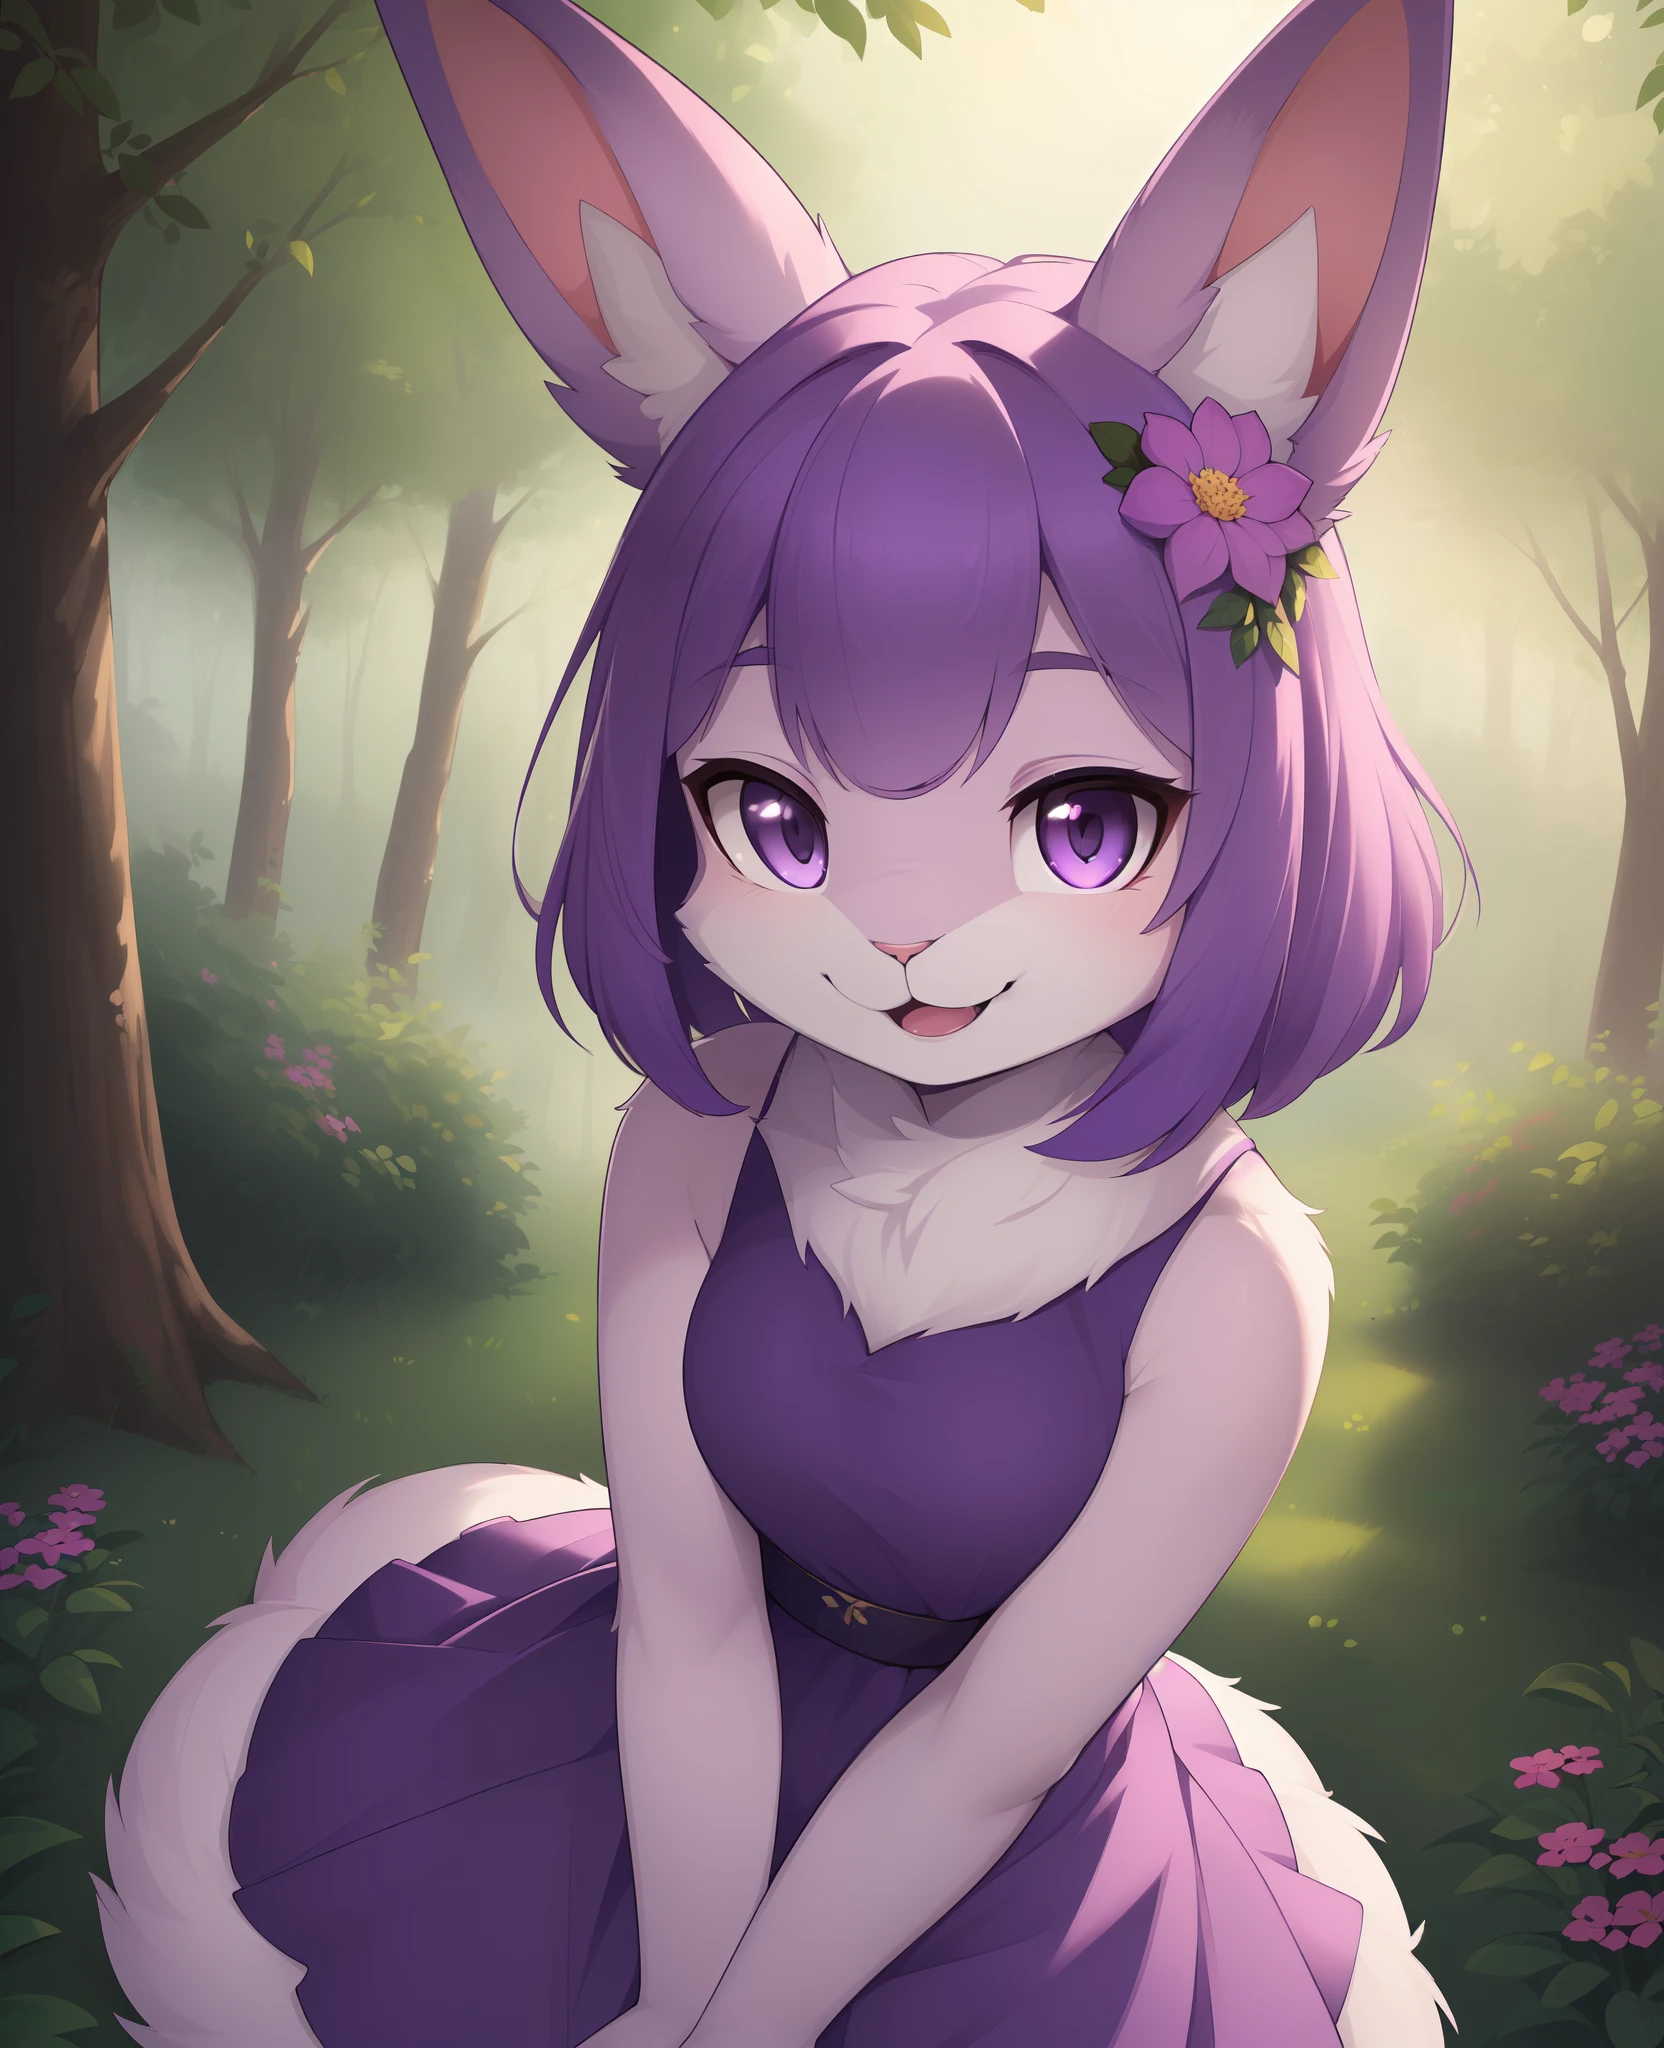 (best quality, highest quality, inticate, highres, 8k, anthropomorphic, furry, uploaded_on_e621:1.4), cute rabbit furry girl,furry female,rabbit ears,purple hair, purple dress,sleeveless, purple skin,in forest,looking at viewer,smile,closed mouth,flowers,slightly above,